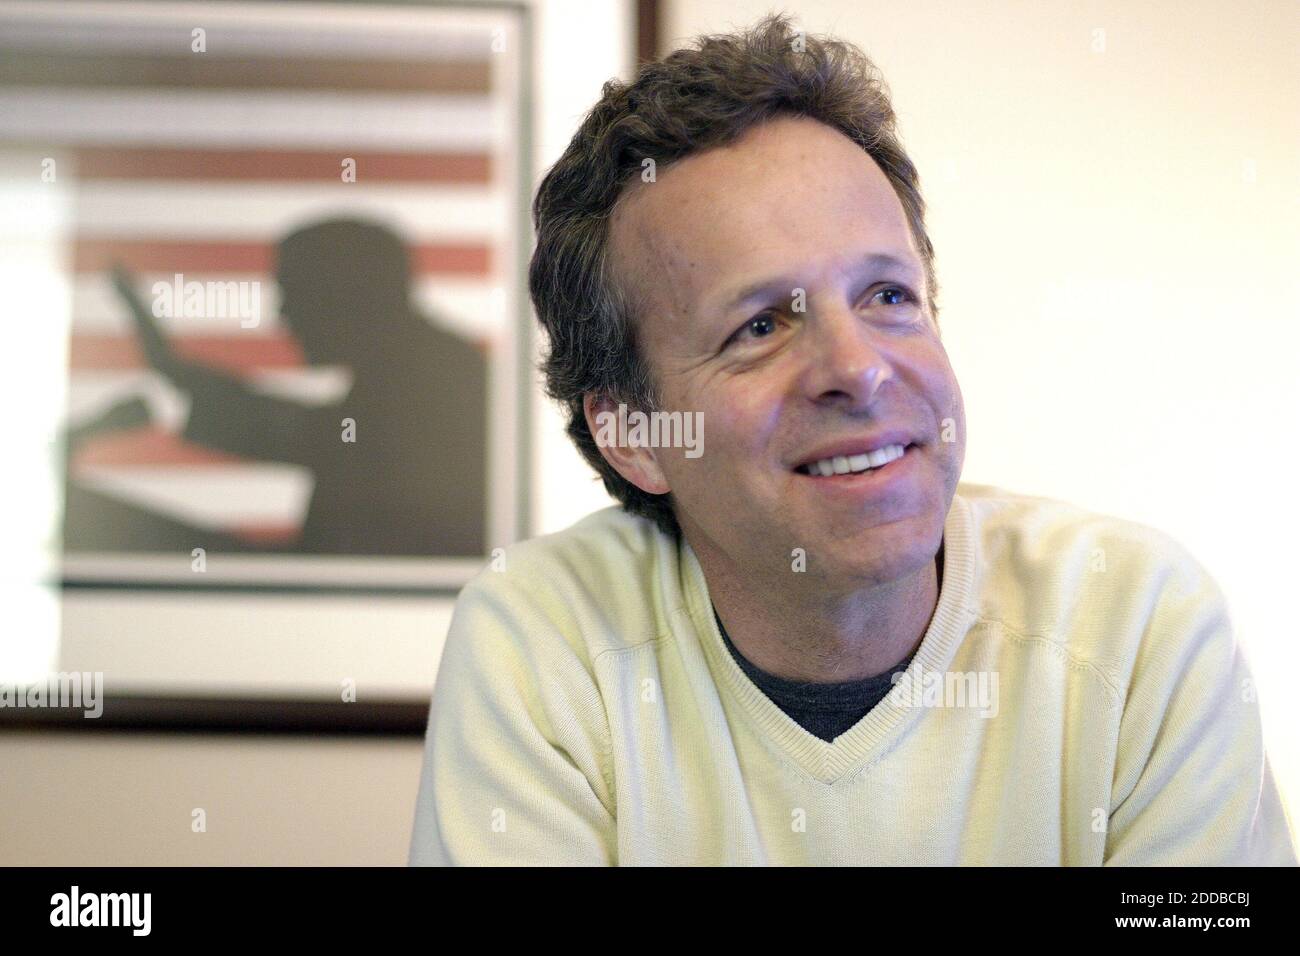 NO FILM, NO VIDEO, NO TV, NO DOCUMENTARY - Mark McKinnon, a political strategist for the Bush 2004 campaign, is shown at his office in Arlington, Virginia, on April 21, 2004. Photo by Chuck Kennedy/KRT/ABACA Stock Photo